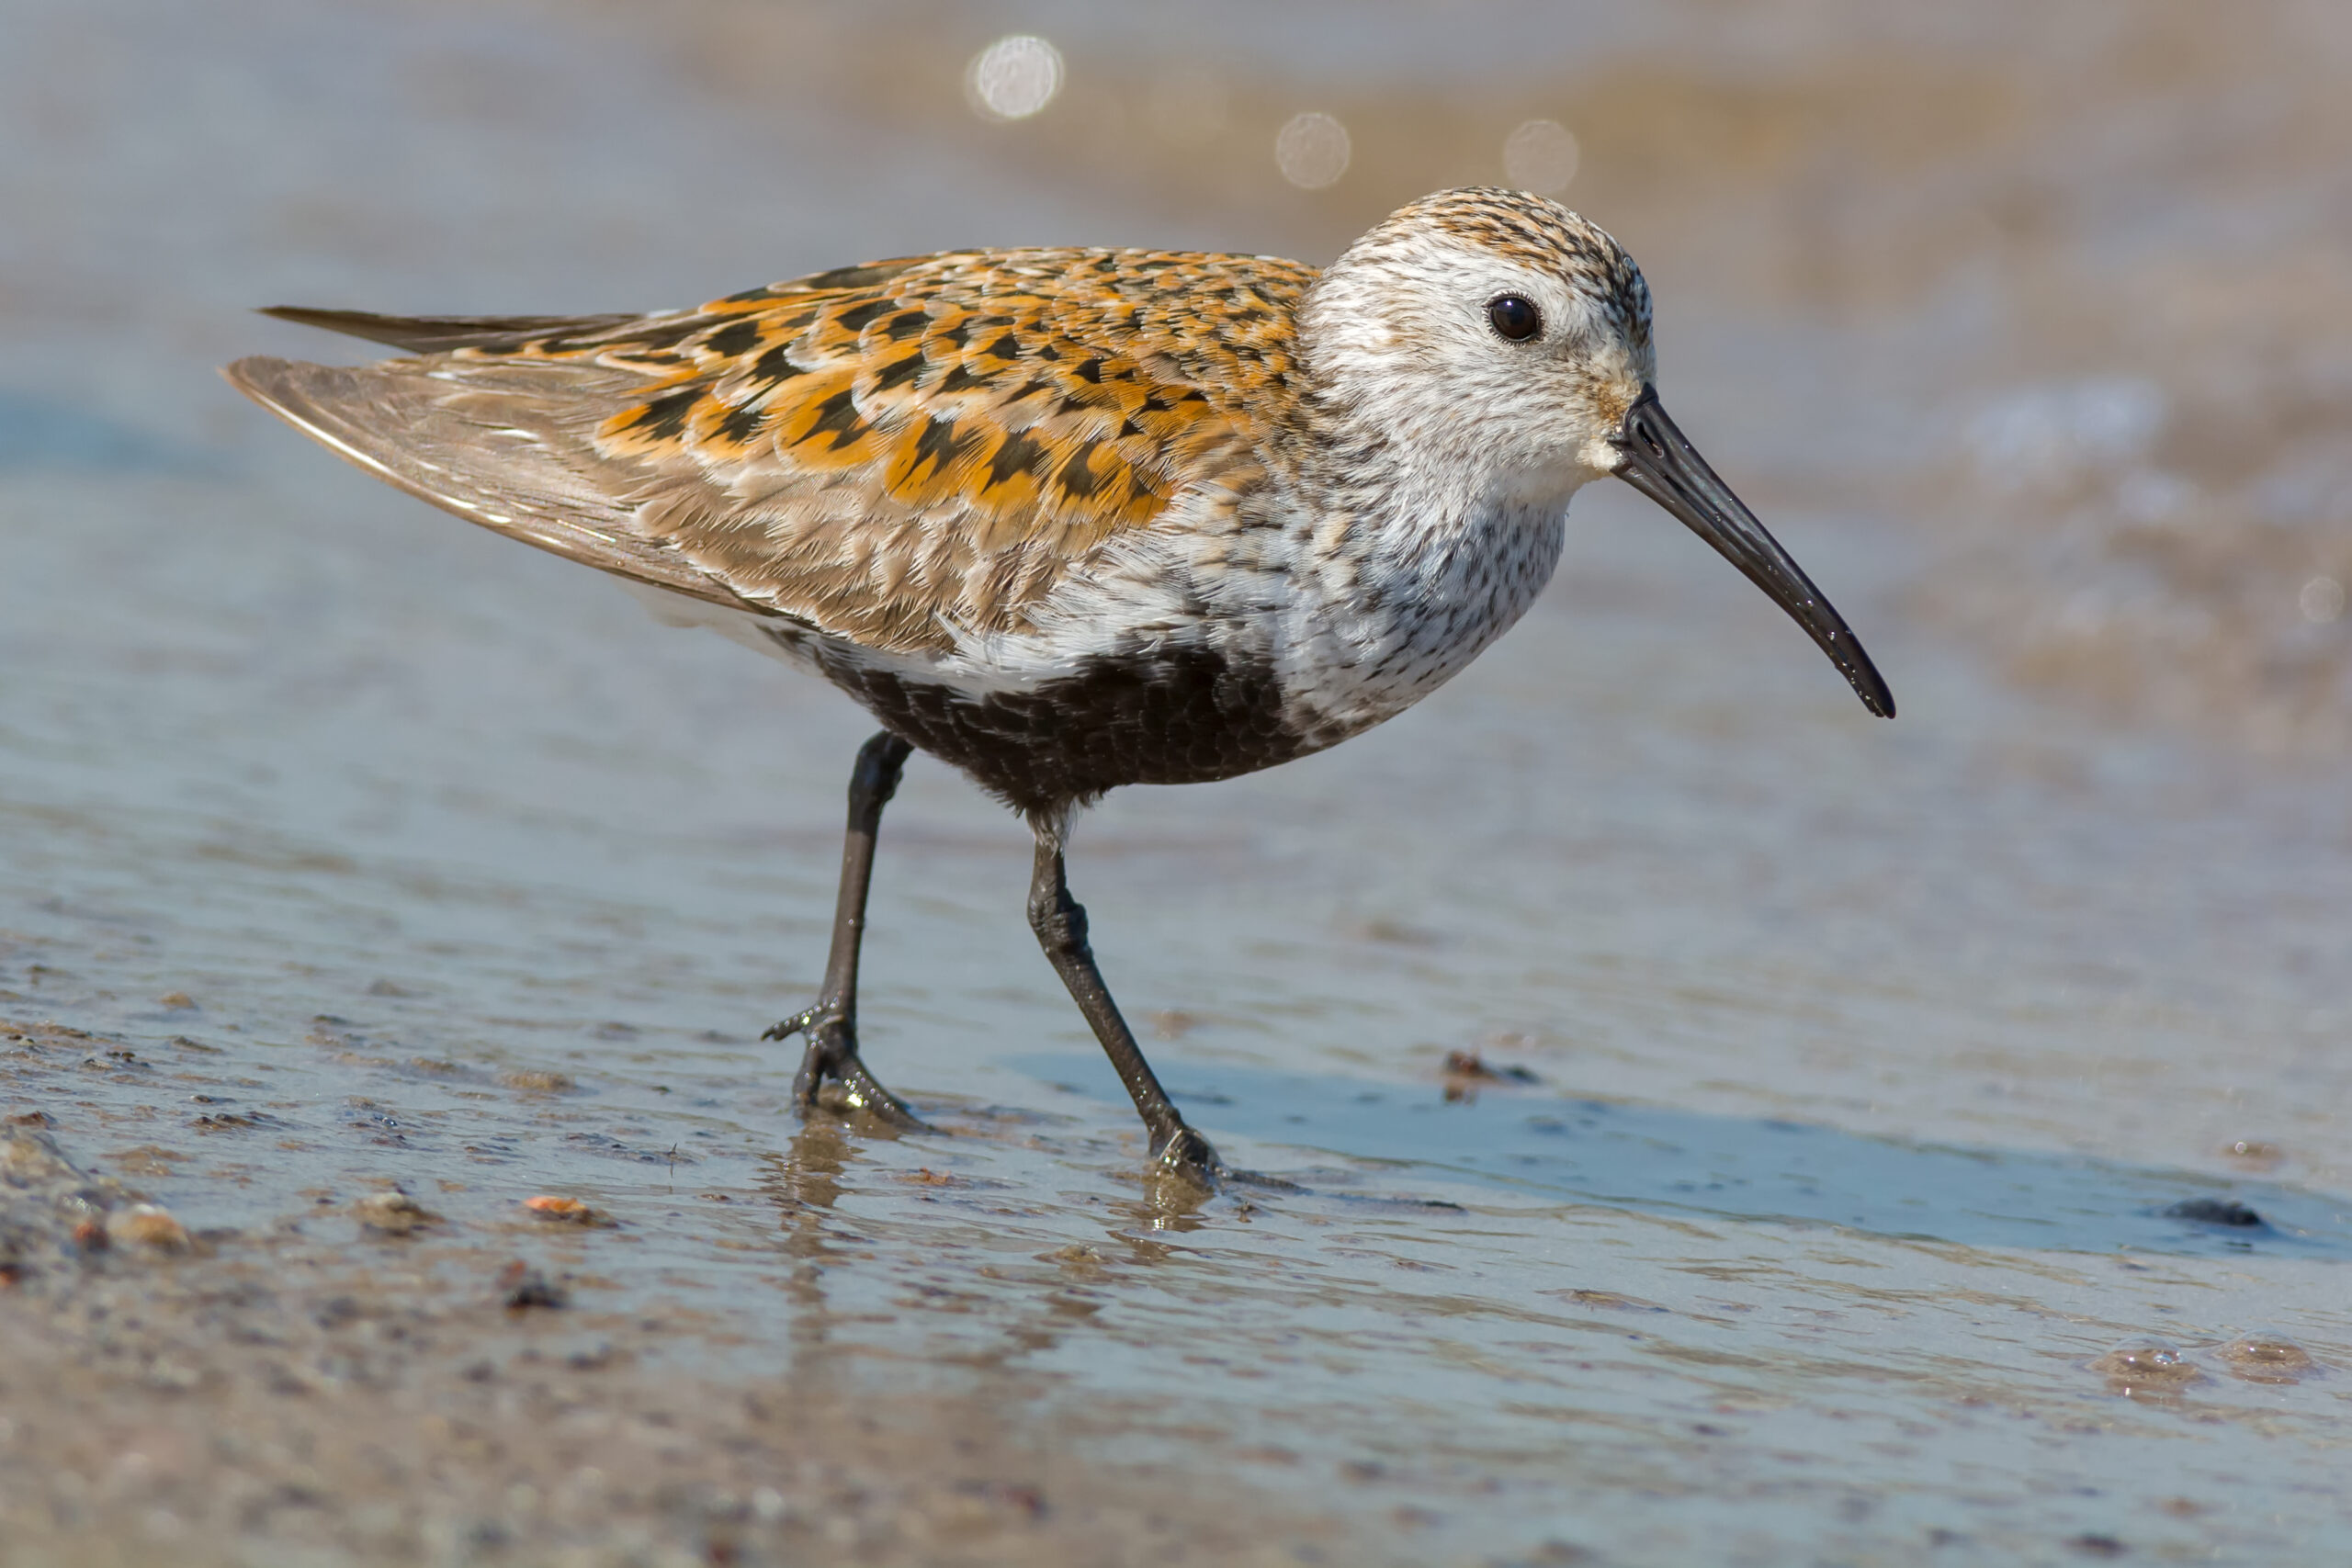 Dunlin - Photo courtesy of Shutterstock Paul Reeves